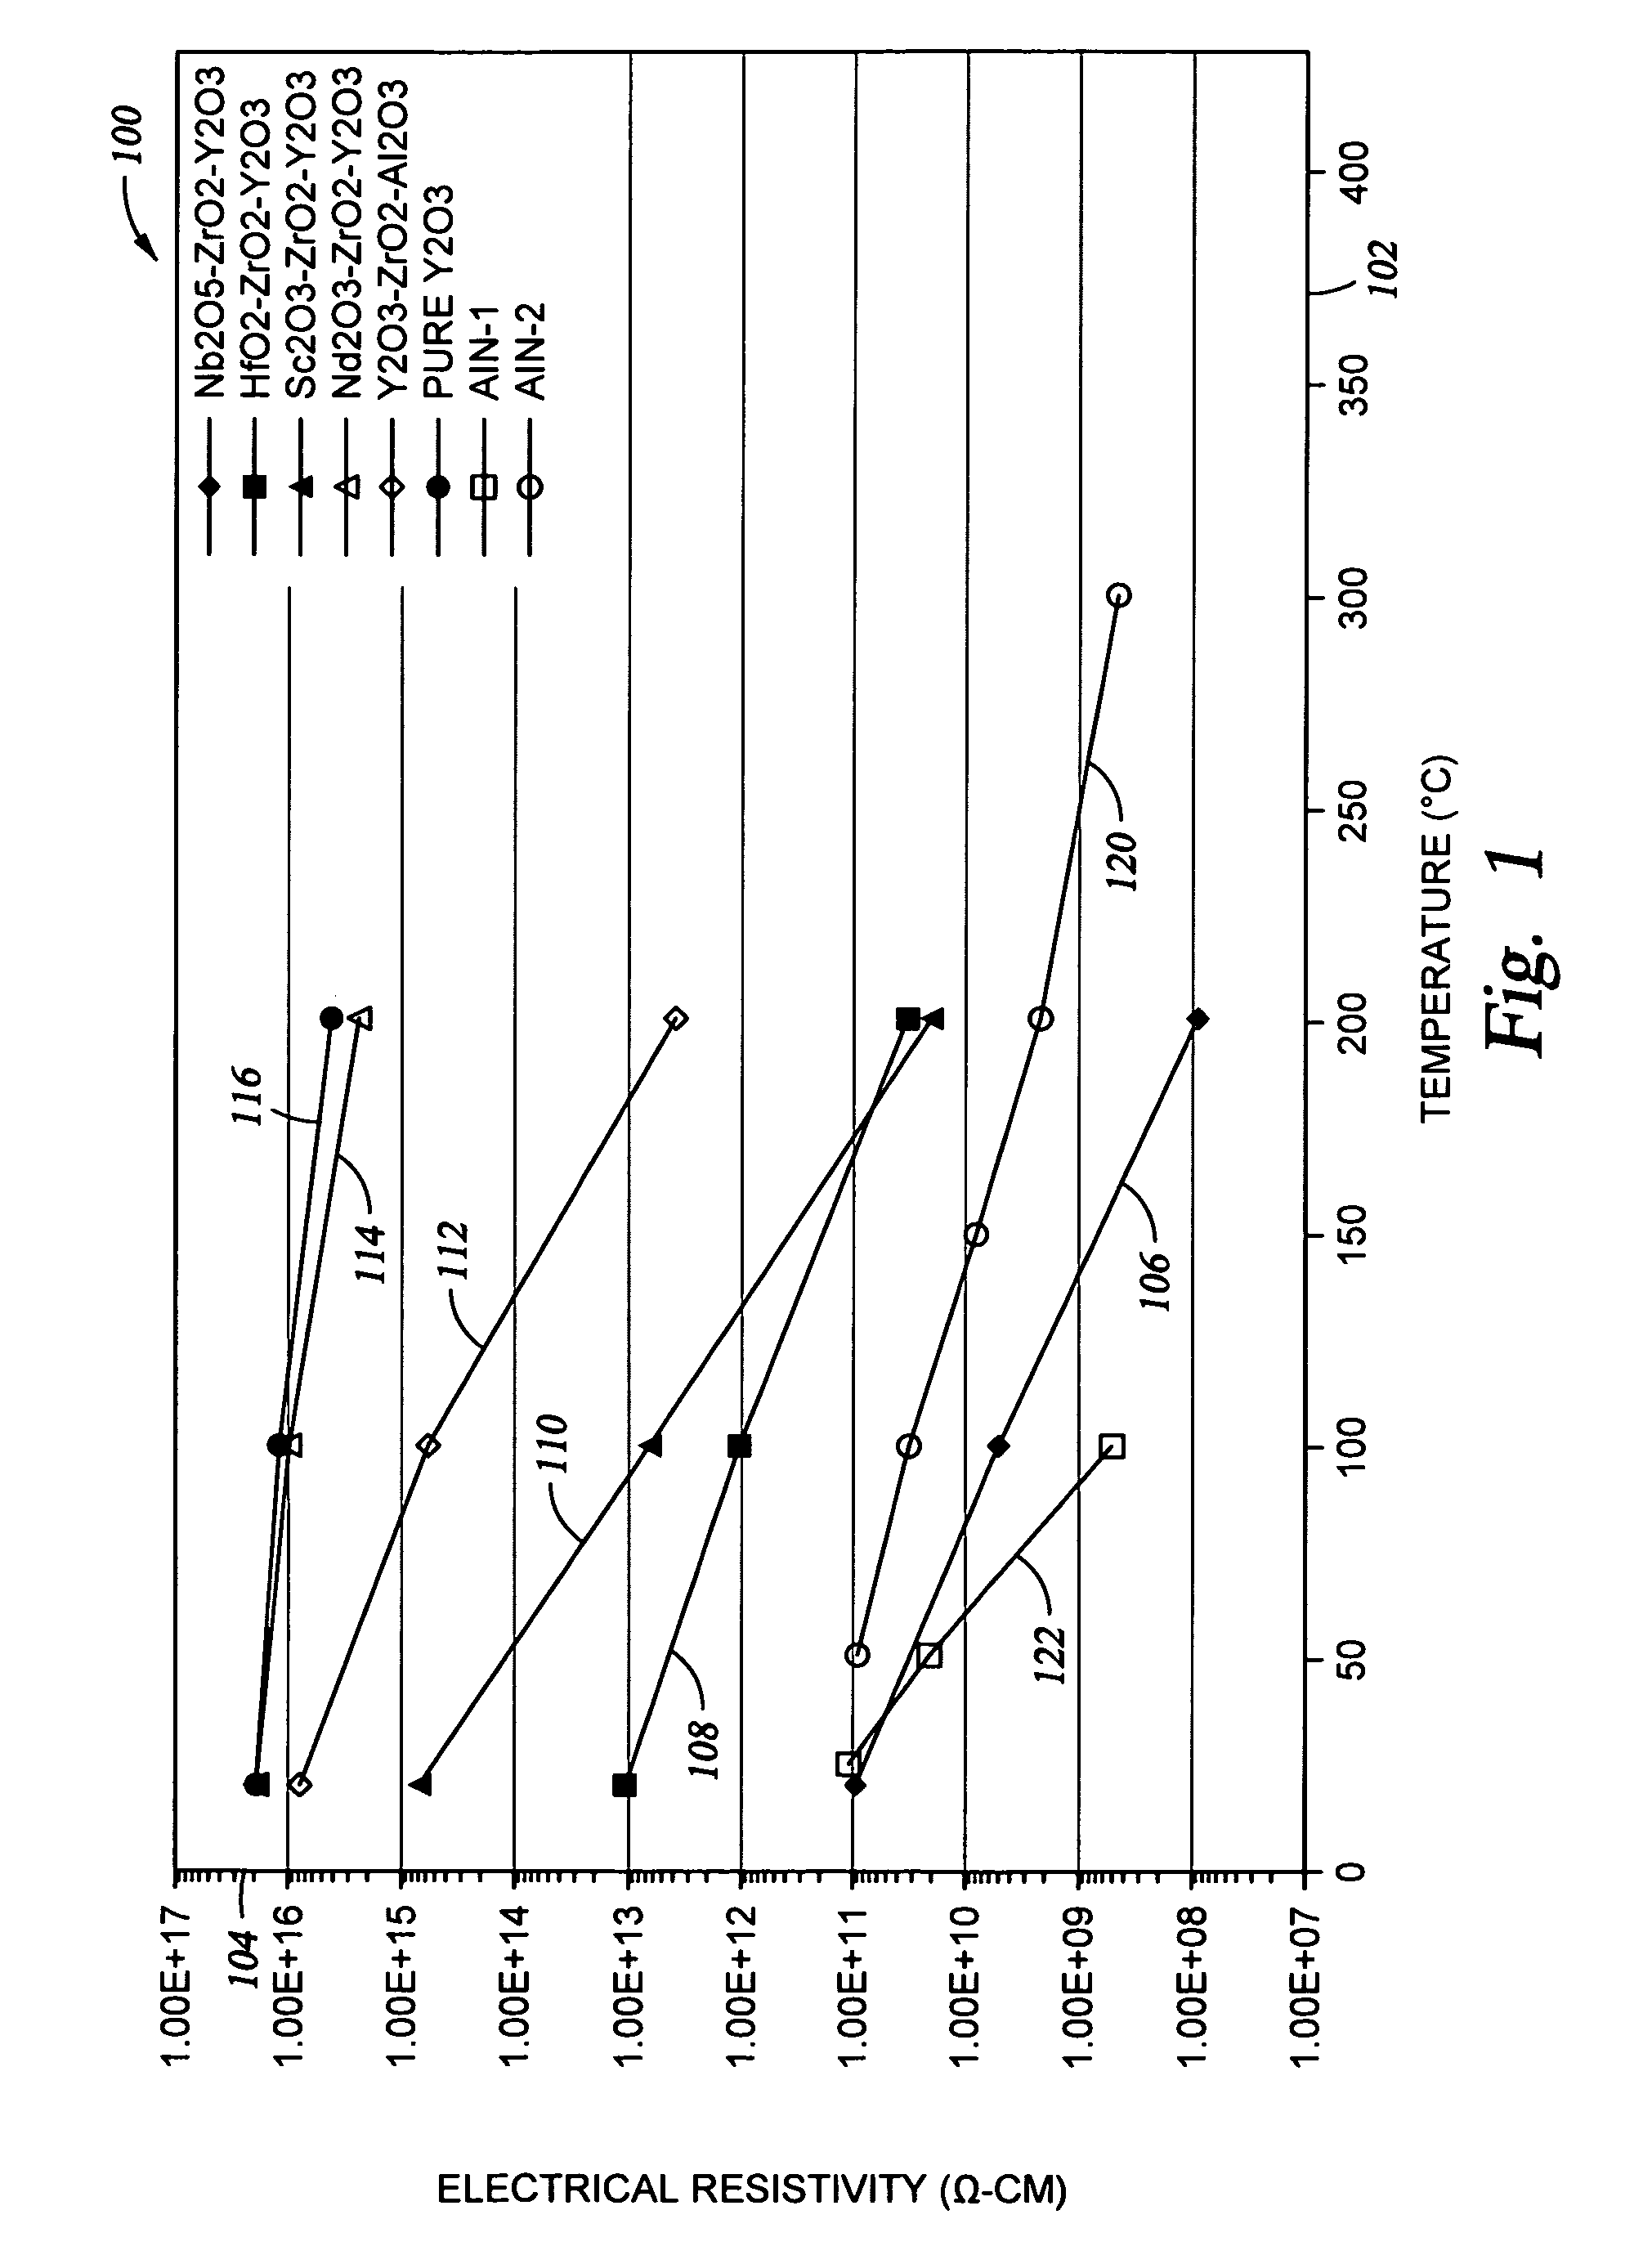 Method of reducing plasma arcing on surfaces of semiconductor processing apparatus components in a plasma processing chamber